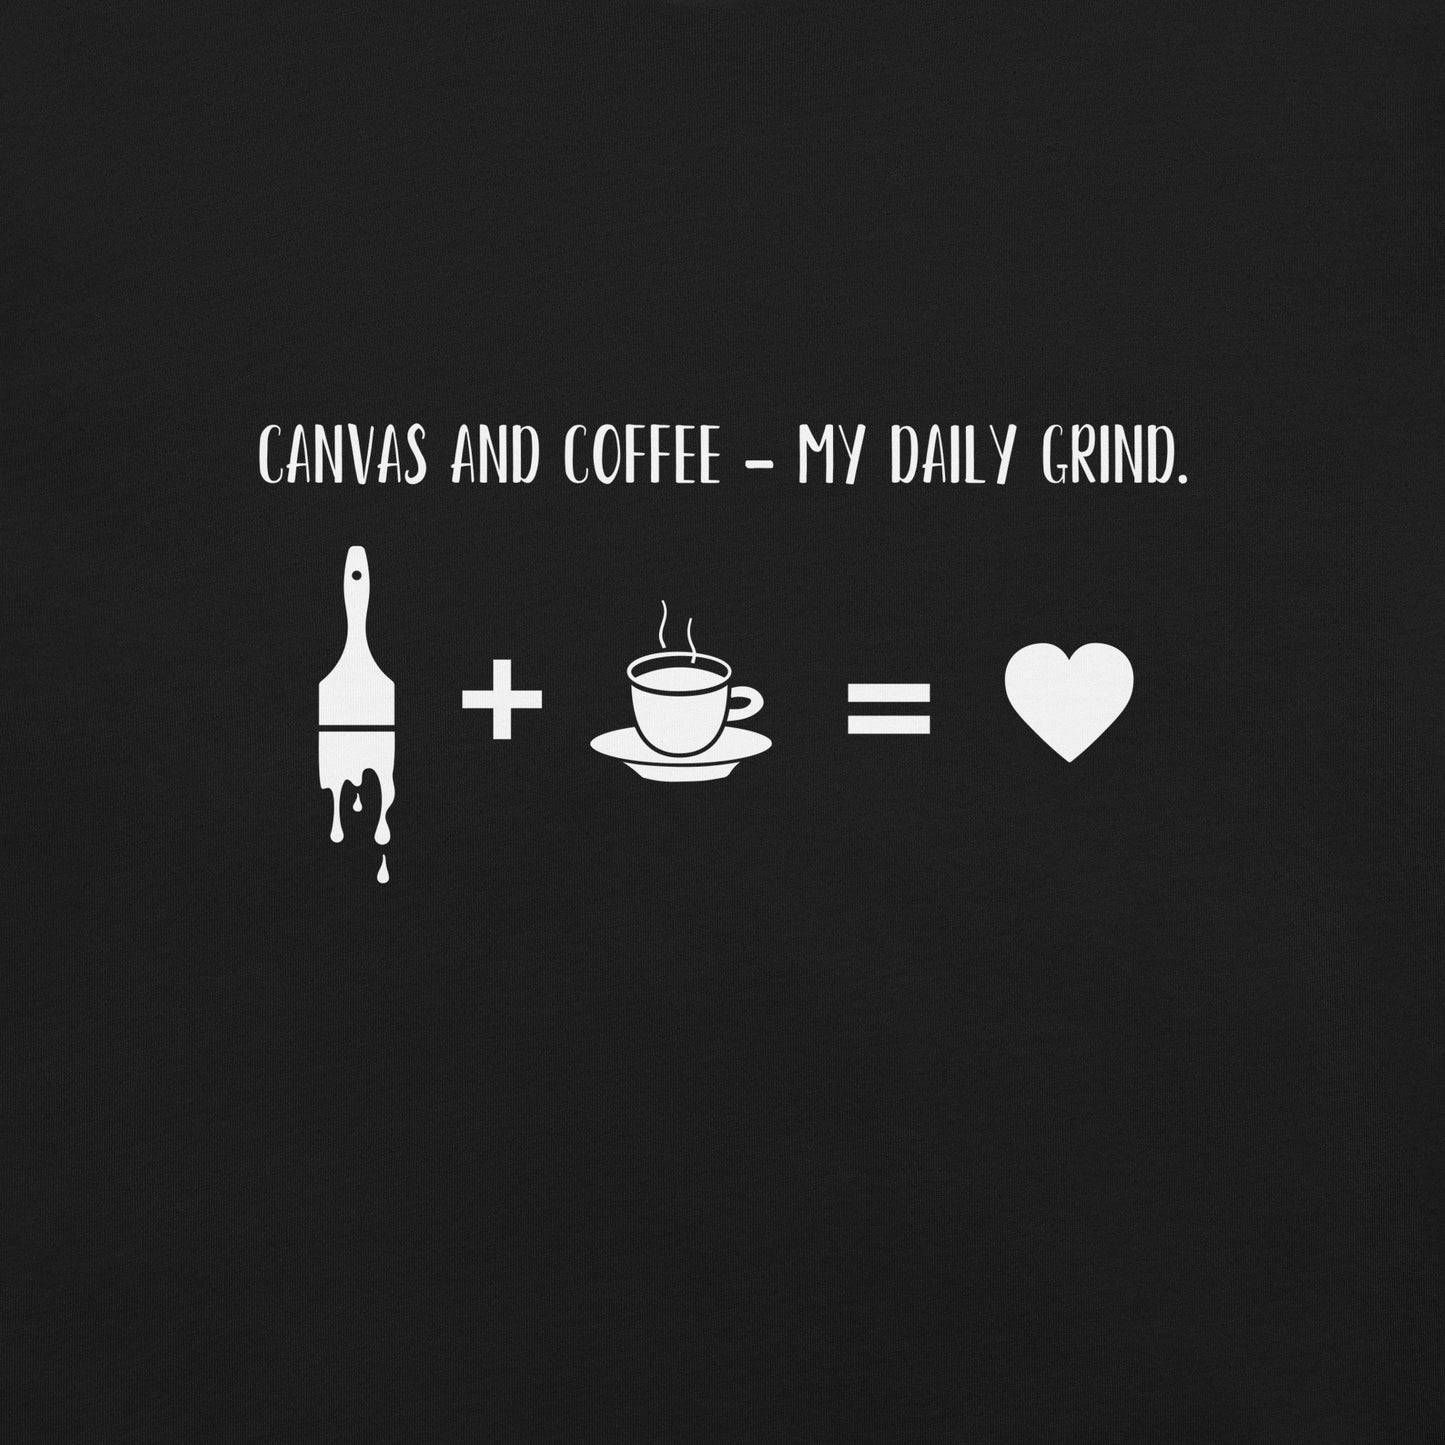 “Canvas and coffee - My daily grind.” - Unisex t-shirt